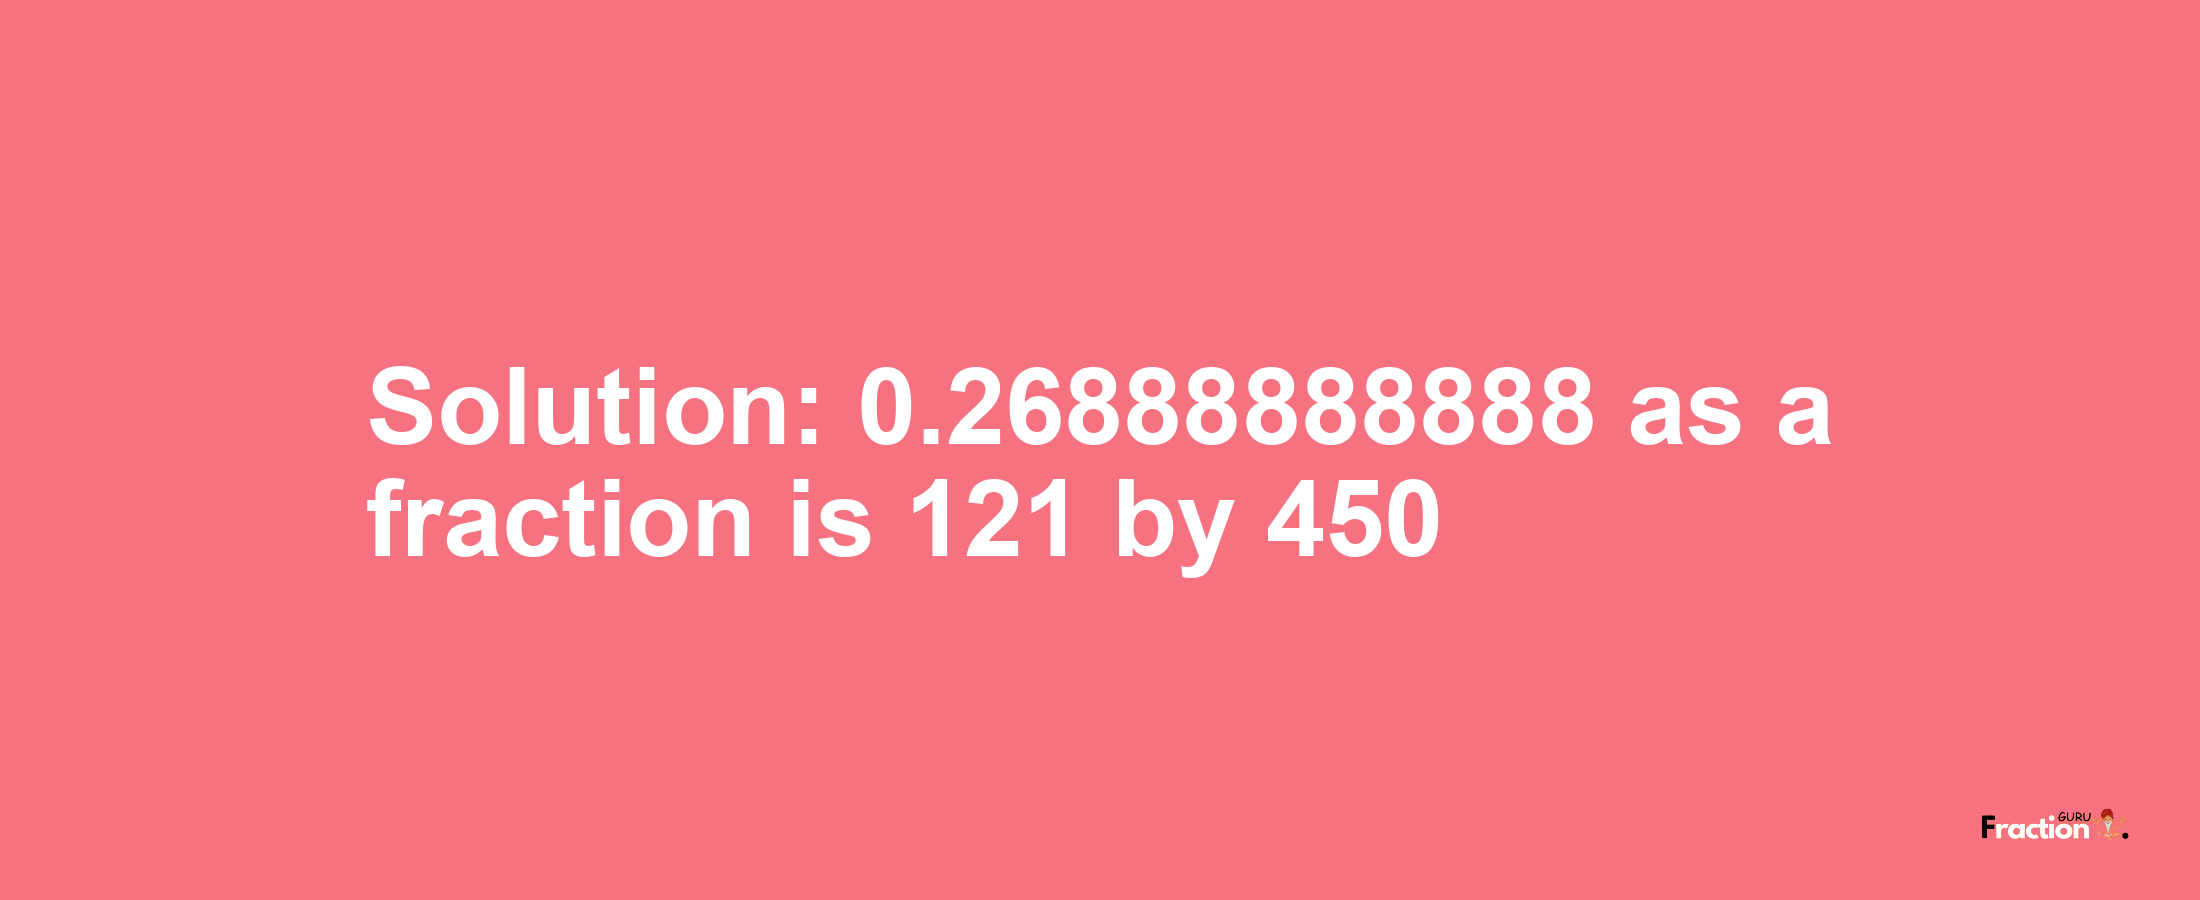 Solution:0.26888888888 as a fraction is 121/450